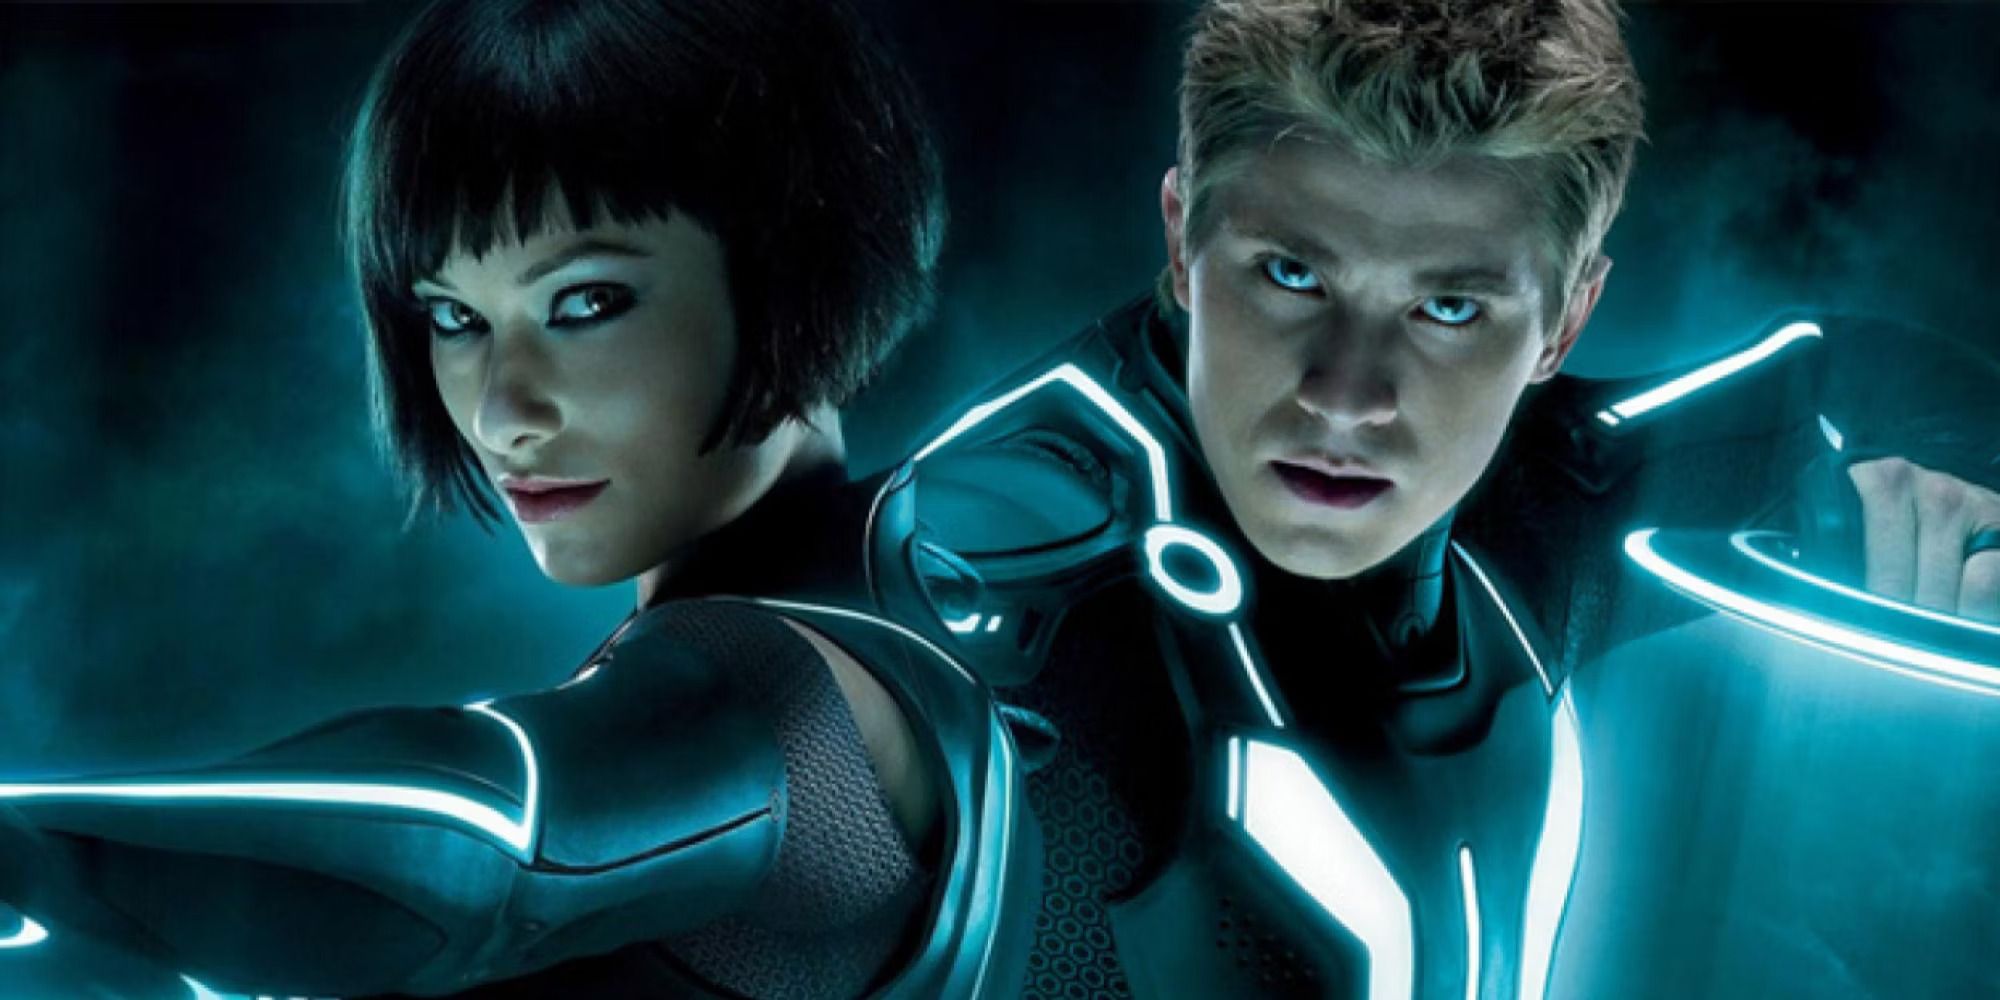 Sam Flynn and Quorra holding identity discs from 'Tron: Legacy'